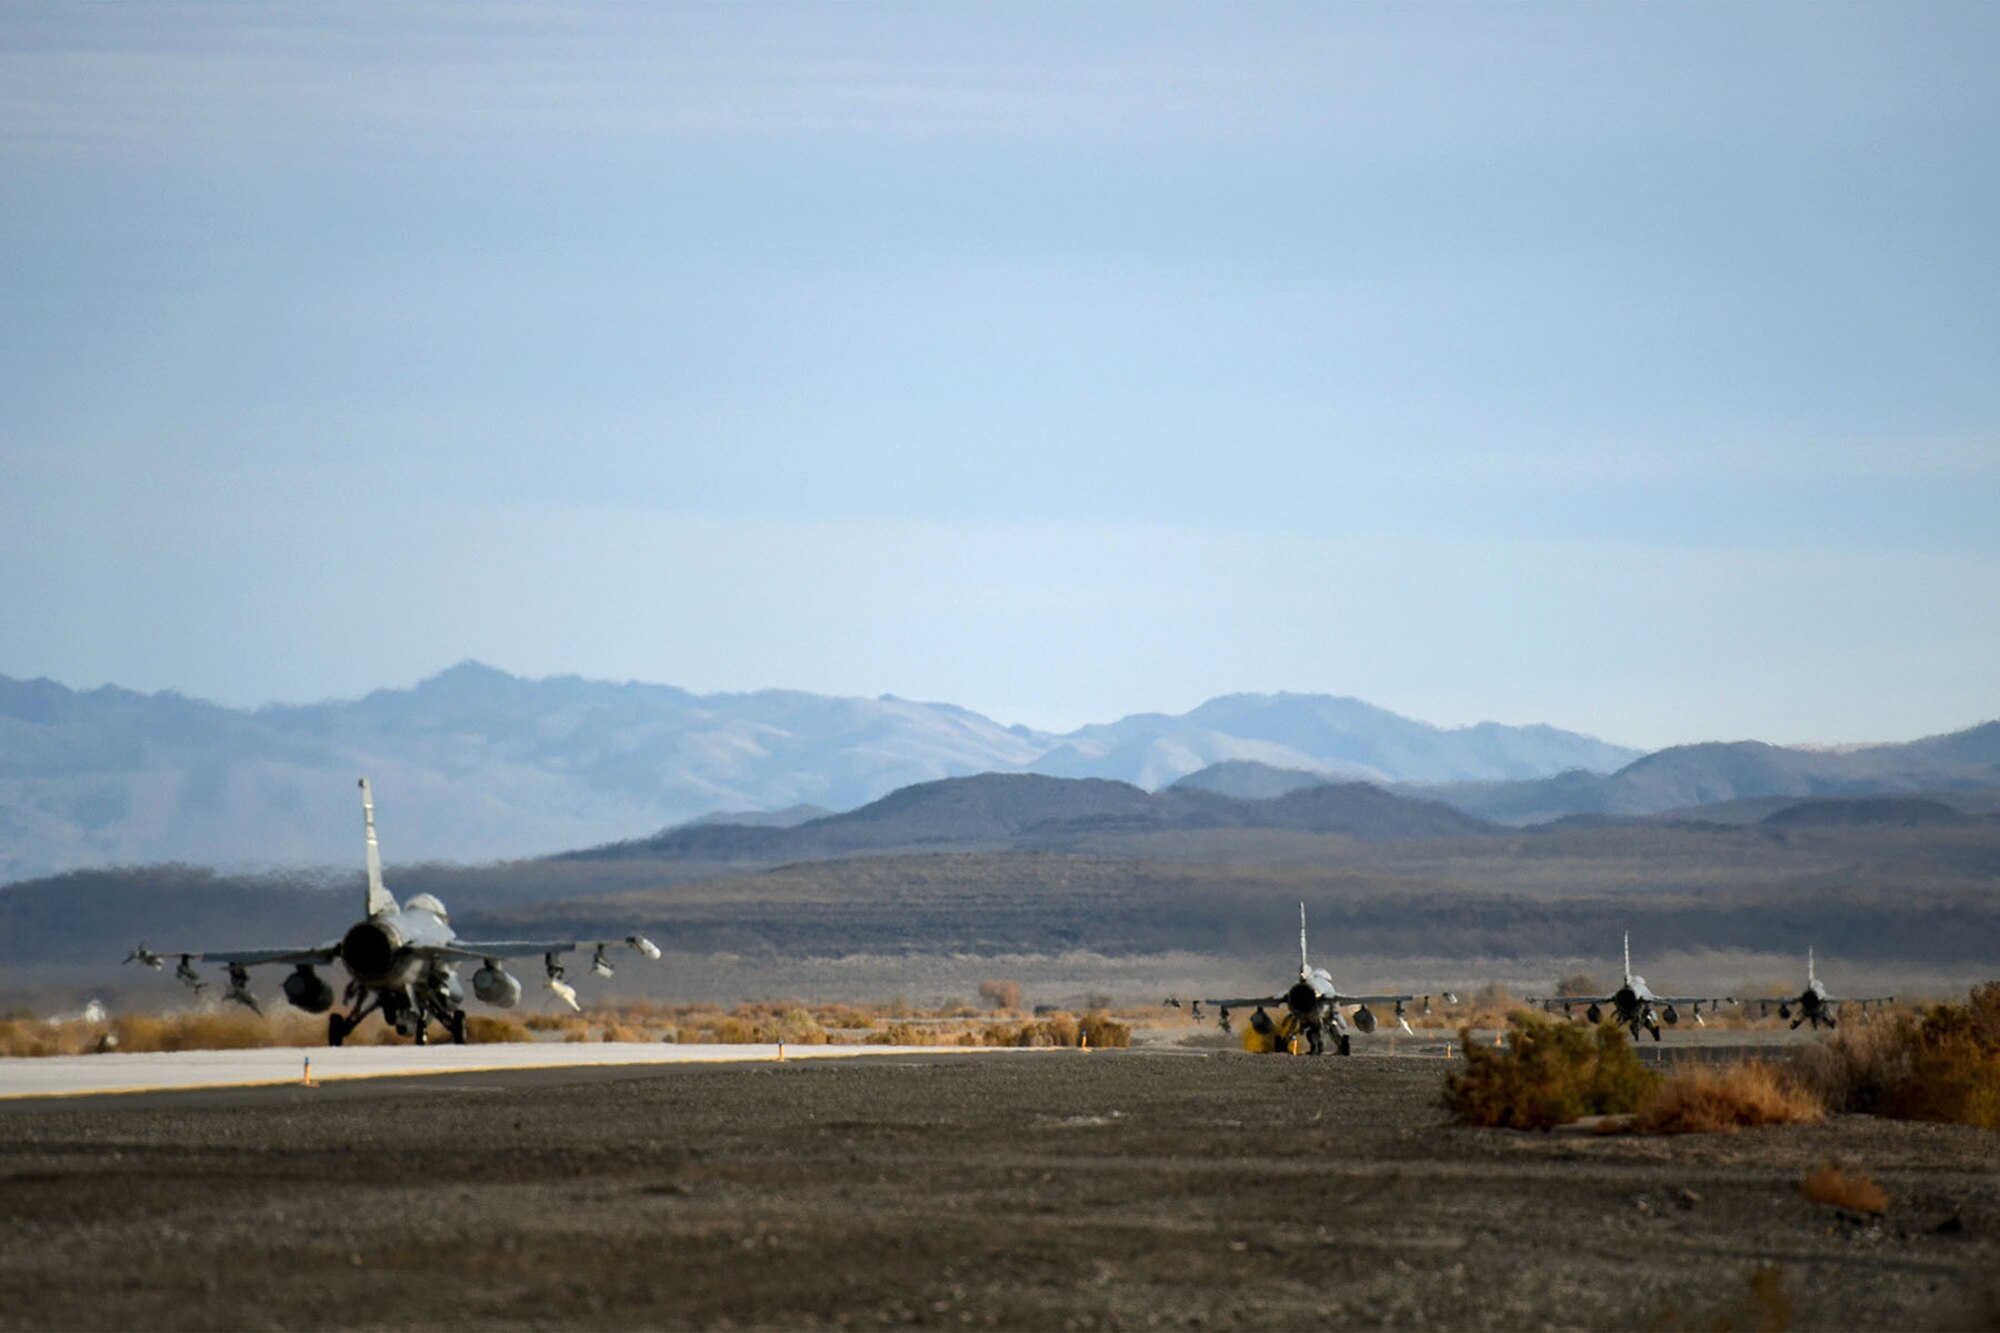 U.S. Air Force fighter pilots from the 157th Fighter Squadron at McEntire Joint National Guard Base, S.C., taxi F-16 Fighting Falcons to take off for a training mission from Naval Air Station Fallon, Nevada, Nov. 12, 2014.  Swamp Fox Airmen from the 169th Fighter Wing and South Carolina Air National Guard are deployed to NAS Fallon to support Naval Carrier Air Wing One with pre-deployment fighter jet training, integrating the F-16’s suppression of enemy air defenses (SEAD) capabilities with U.S. Navy fighter pilots.   (U.S. Air National Guard photo by Tech. Sgt. Caycee Watson/RELEASED)